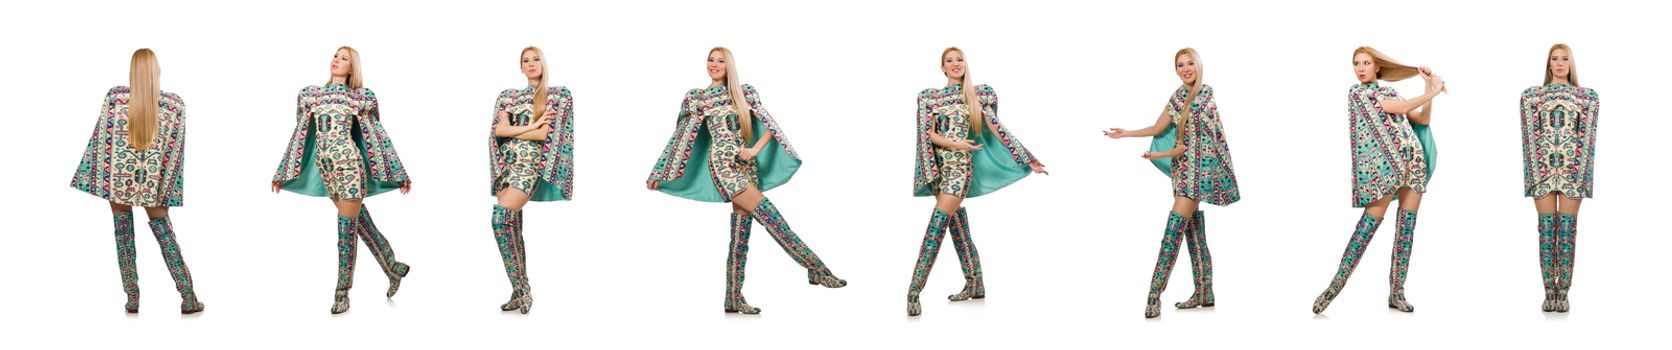 Model wearing dress with Azerbaijani carpet elements isolated on white